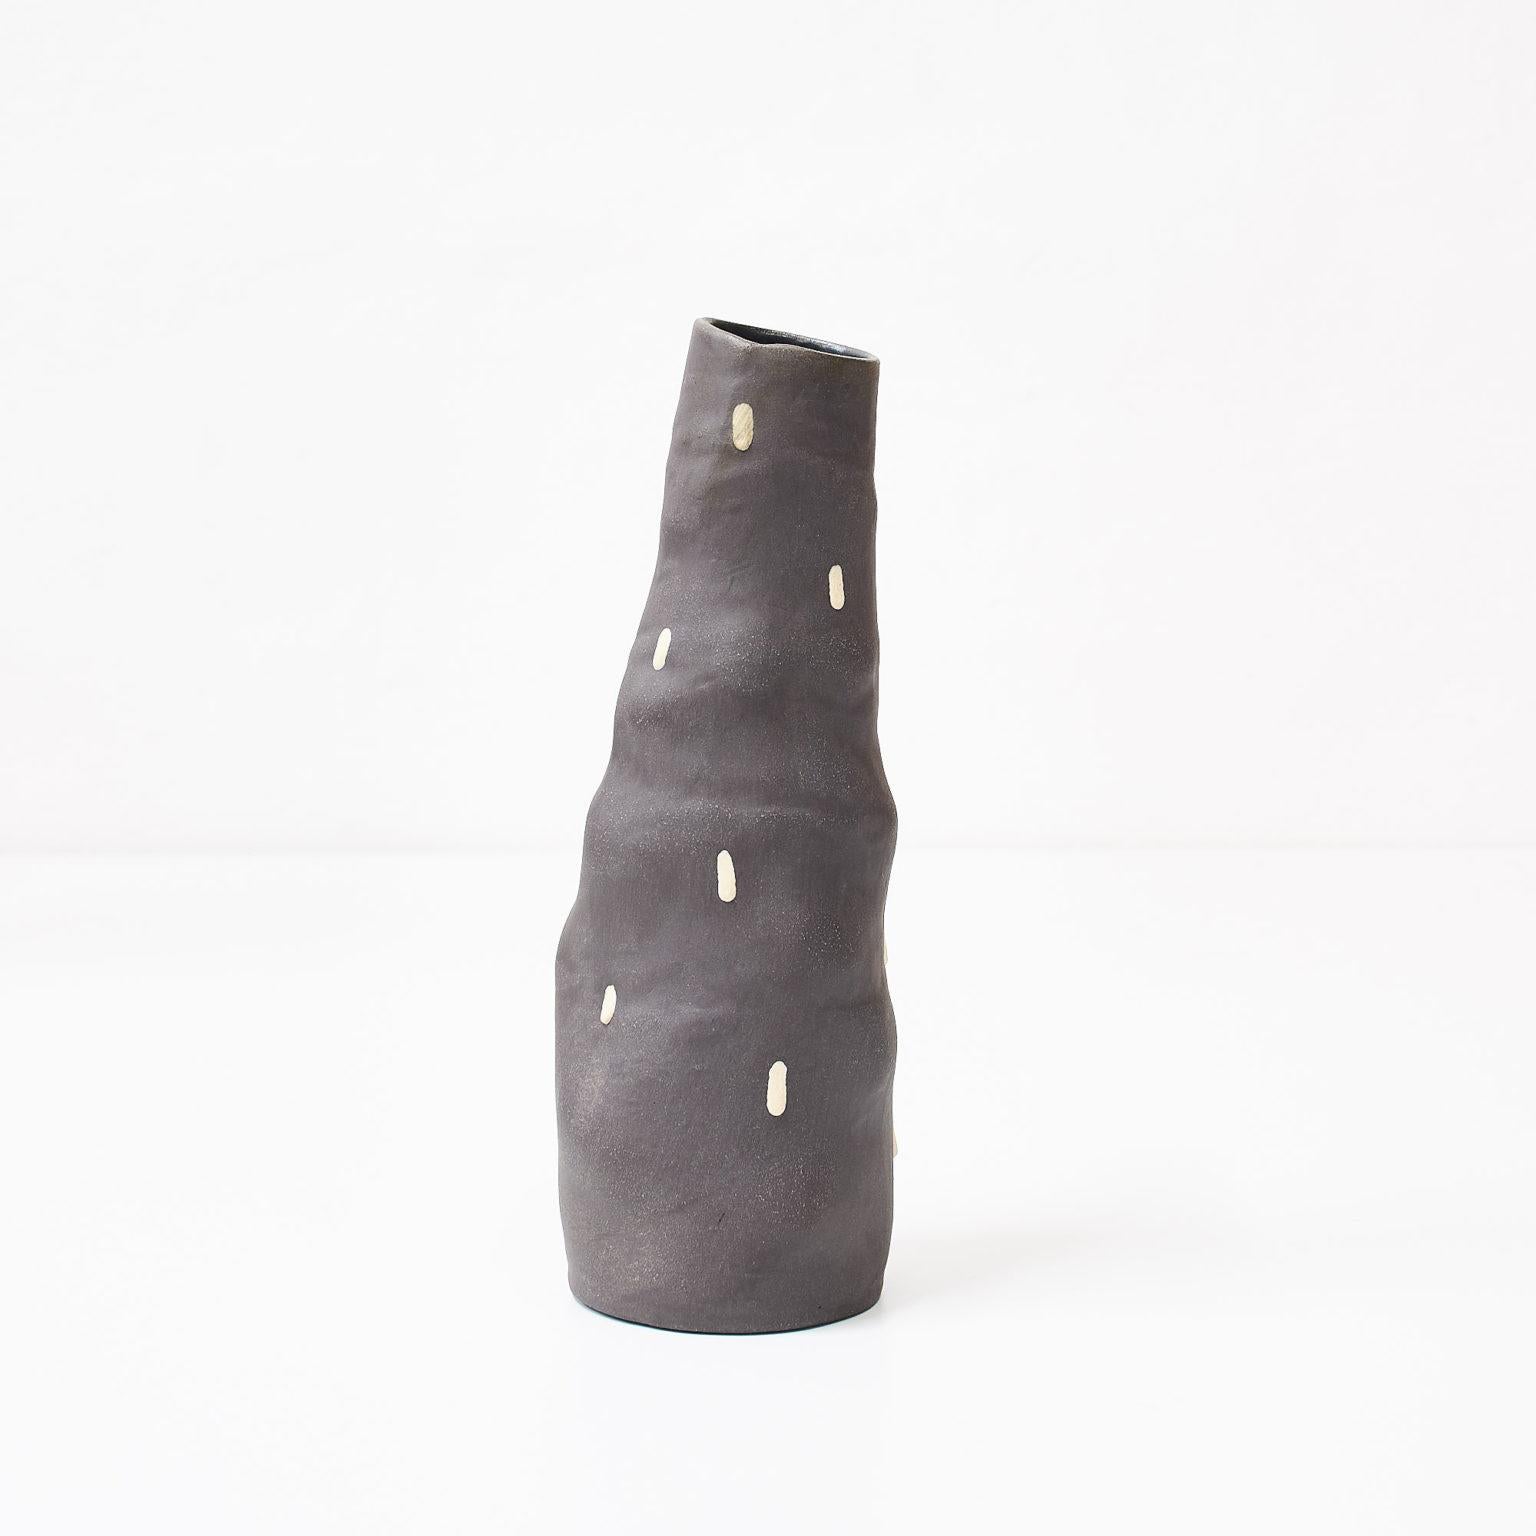 Cucumber vase by Siup Studio
Dimensions: D9 x H21cm
Materials: Ceramics

Siup is a small design studio based in Warsaw. The concept is created by three friends – Martyna Dymek, Marcin Sieczka and Kasia Skoczylas – who have met in University of